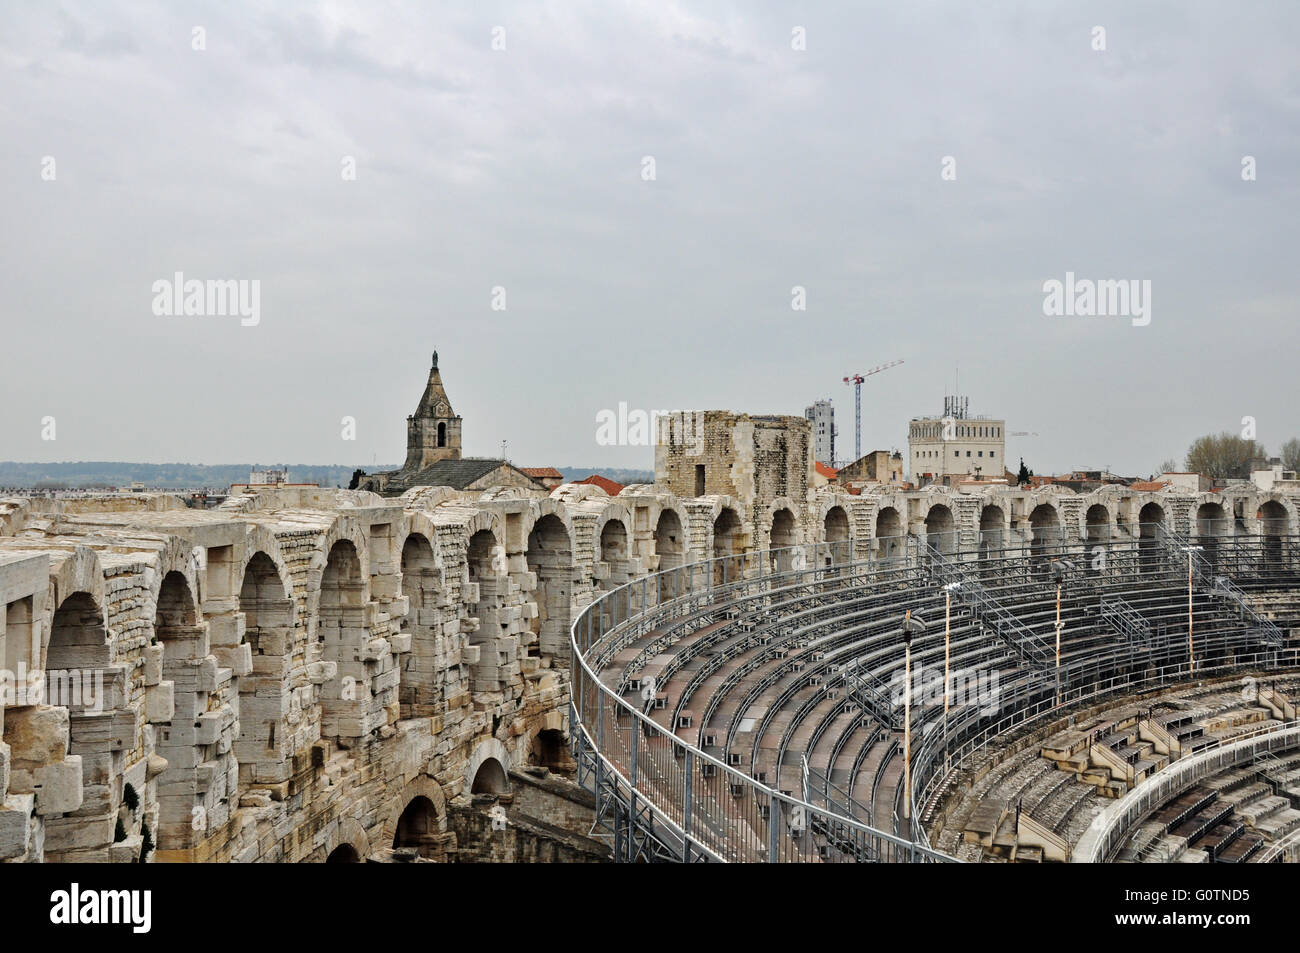 The arches of the Amphitheatre of Arles, Provence, France. Stock Photo